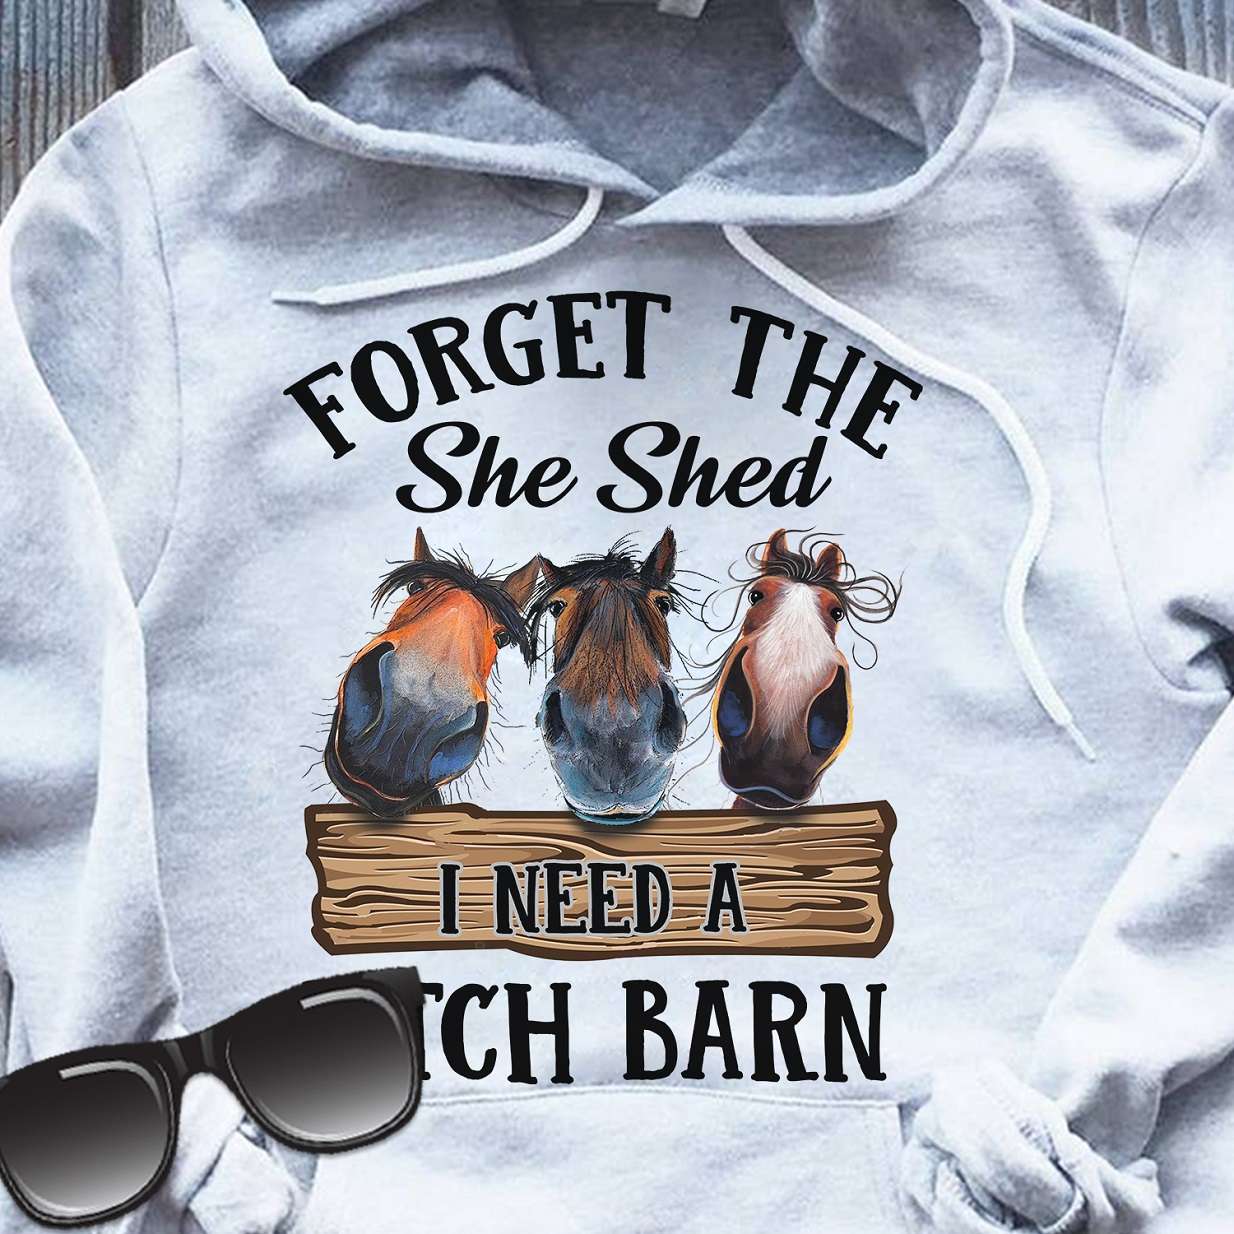 Horse Barn, The Horse Tees Gifts - Forget the she shed i need a bitch born